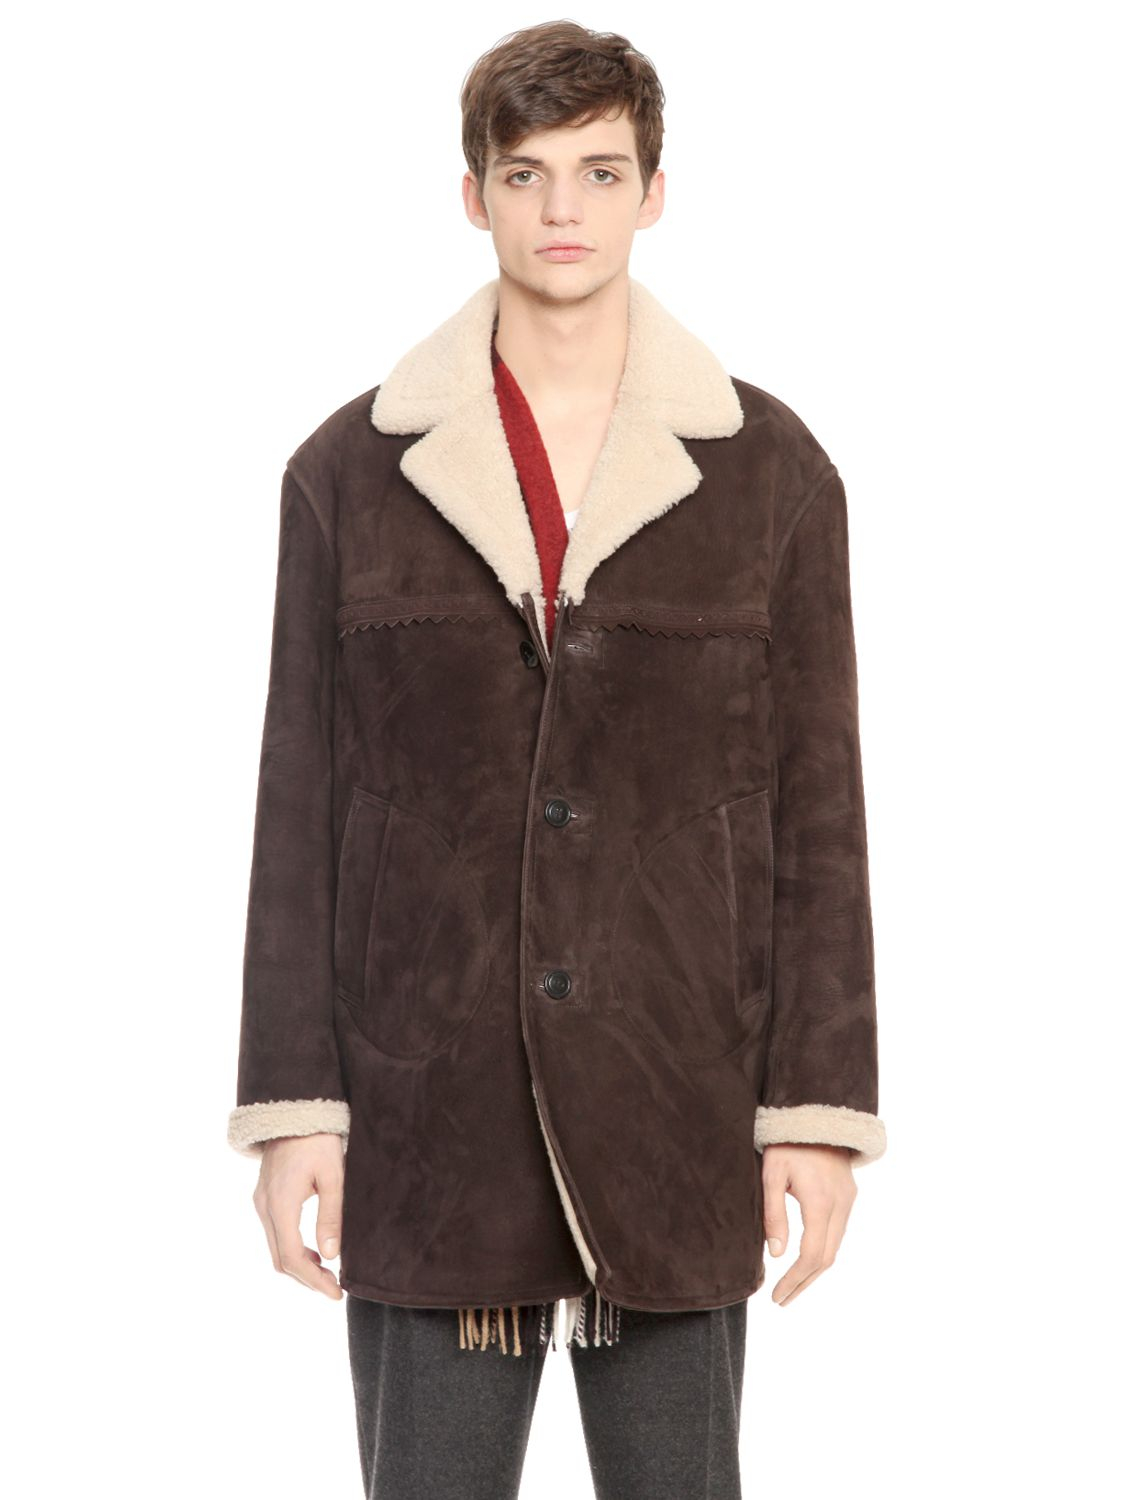 Burberry Prorsum Shearling & Suede Coat in Brown for Men - Lyst